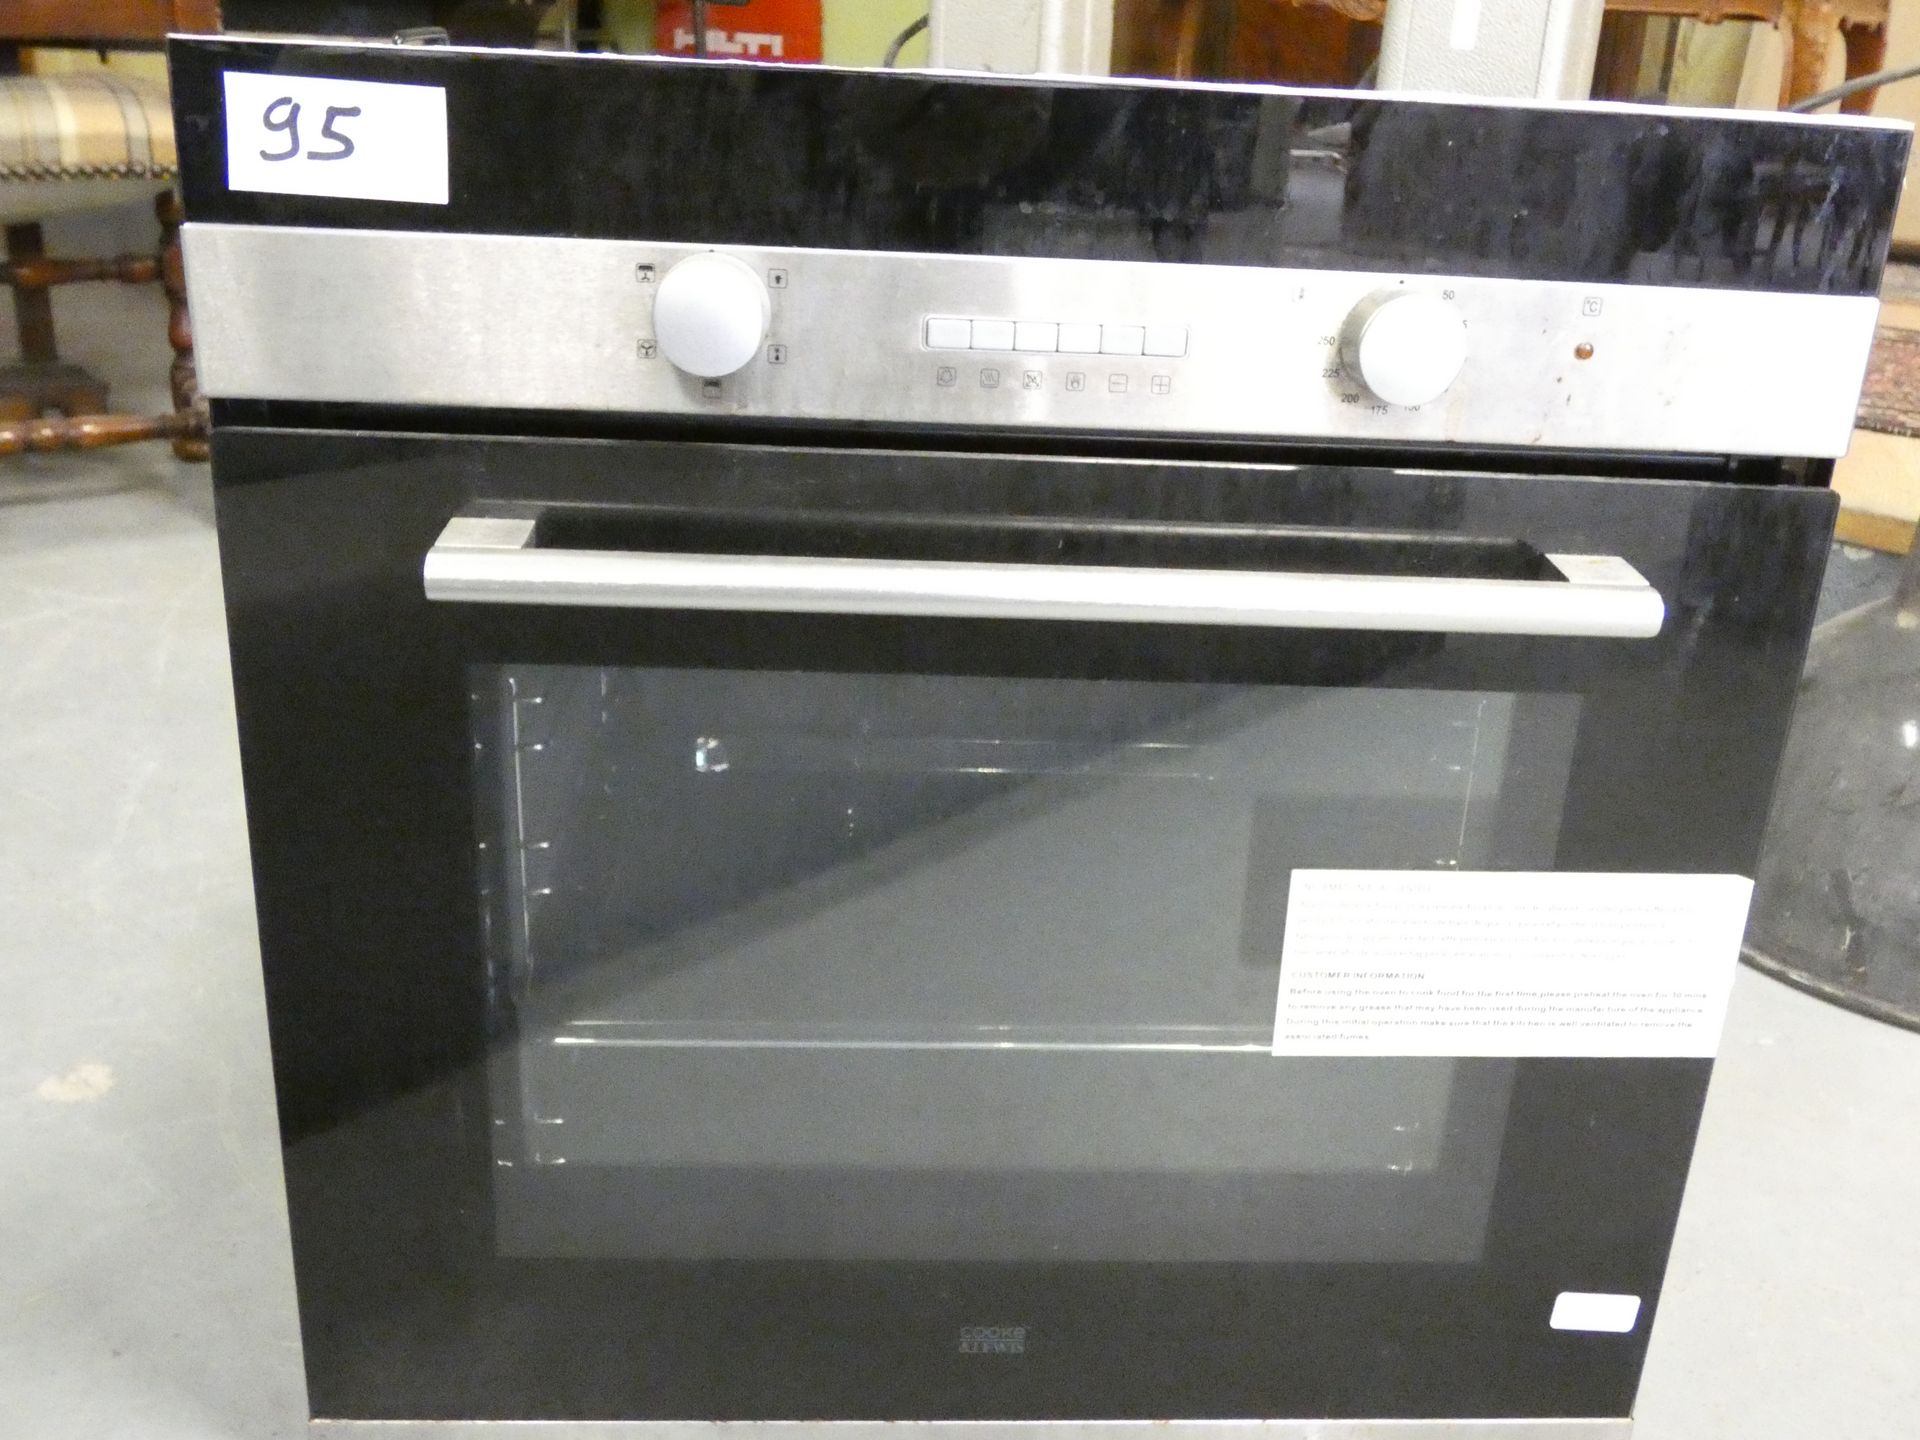 Null 
1台Cook and Lewis嵌入式烤箱L60xp47xh60cm